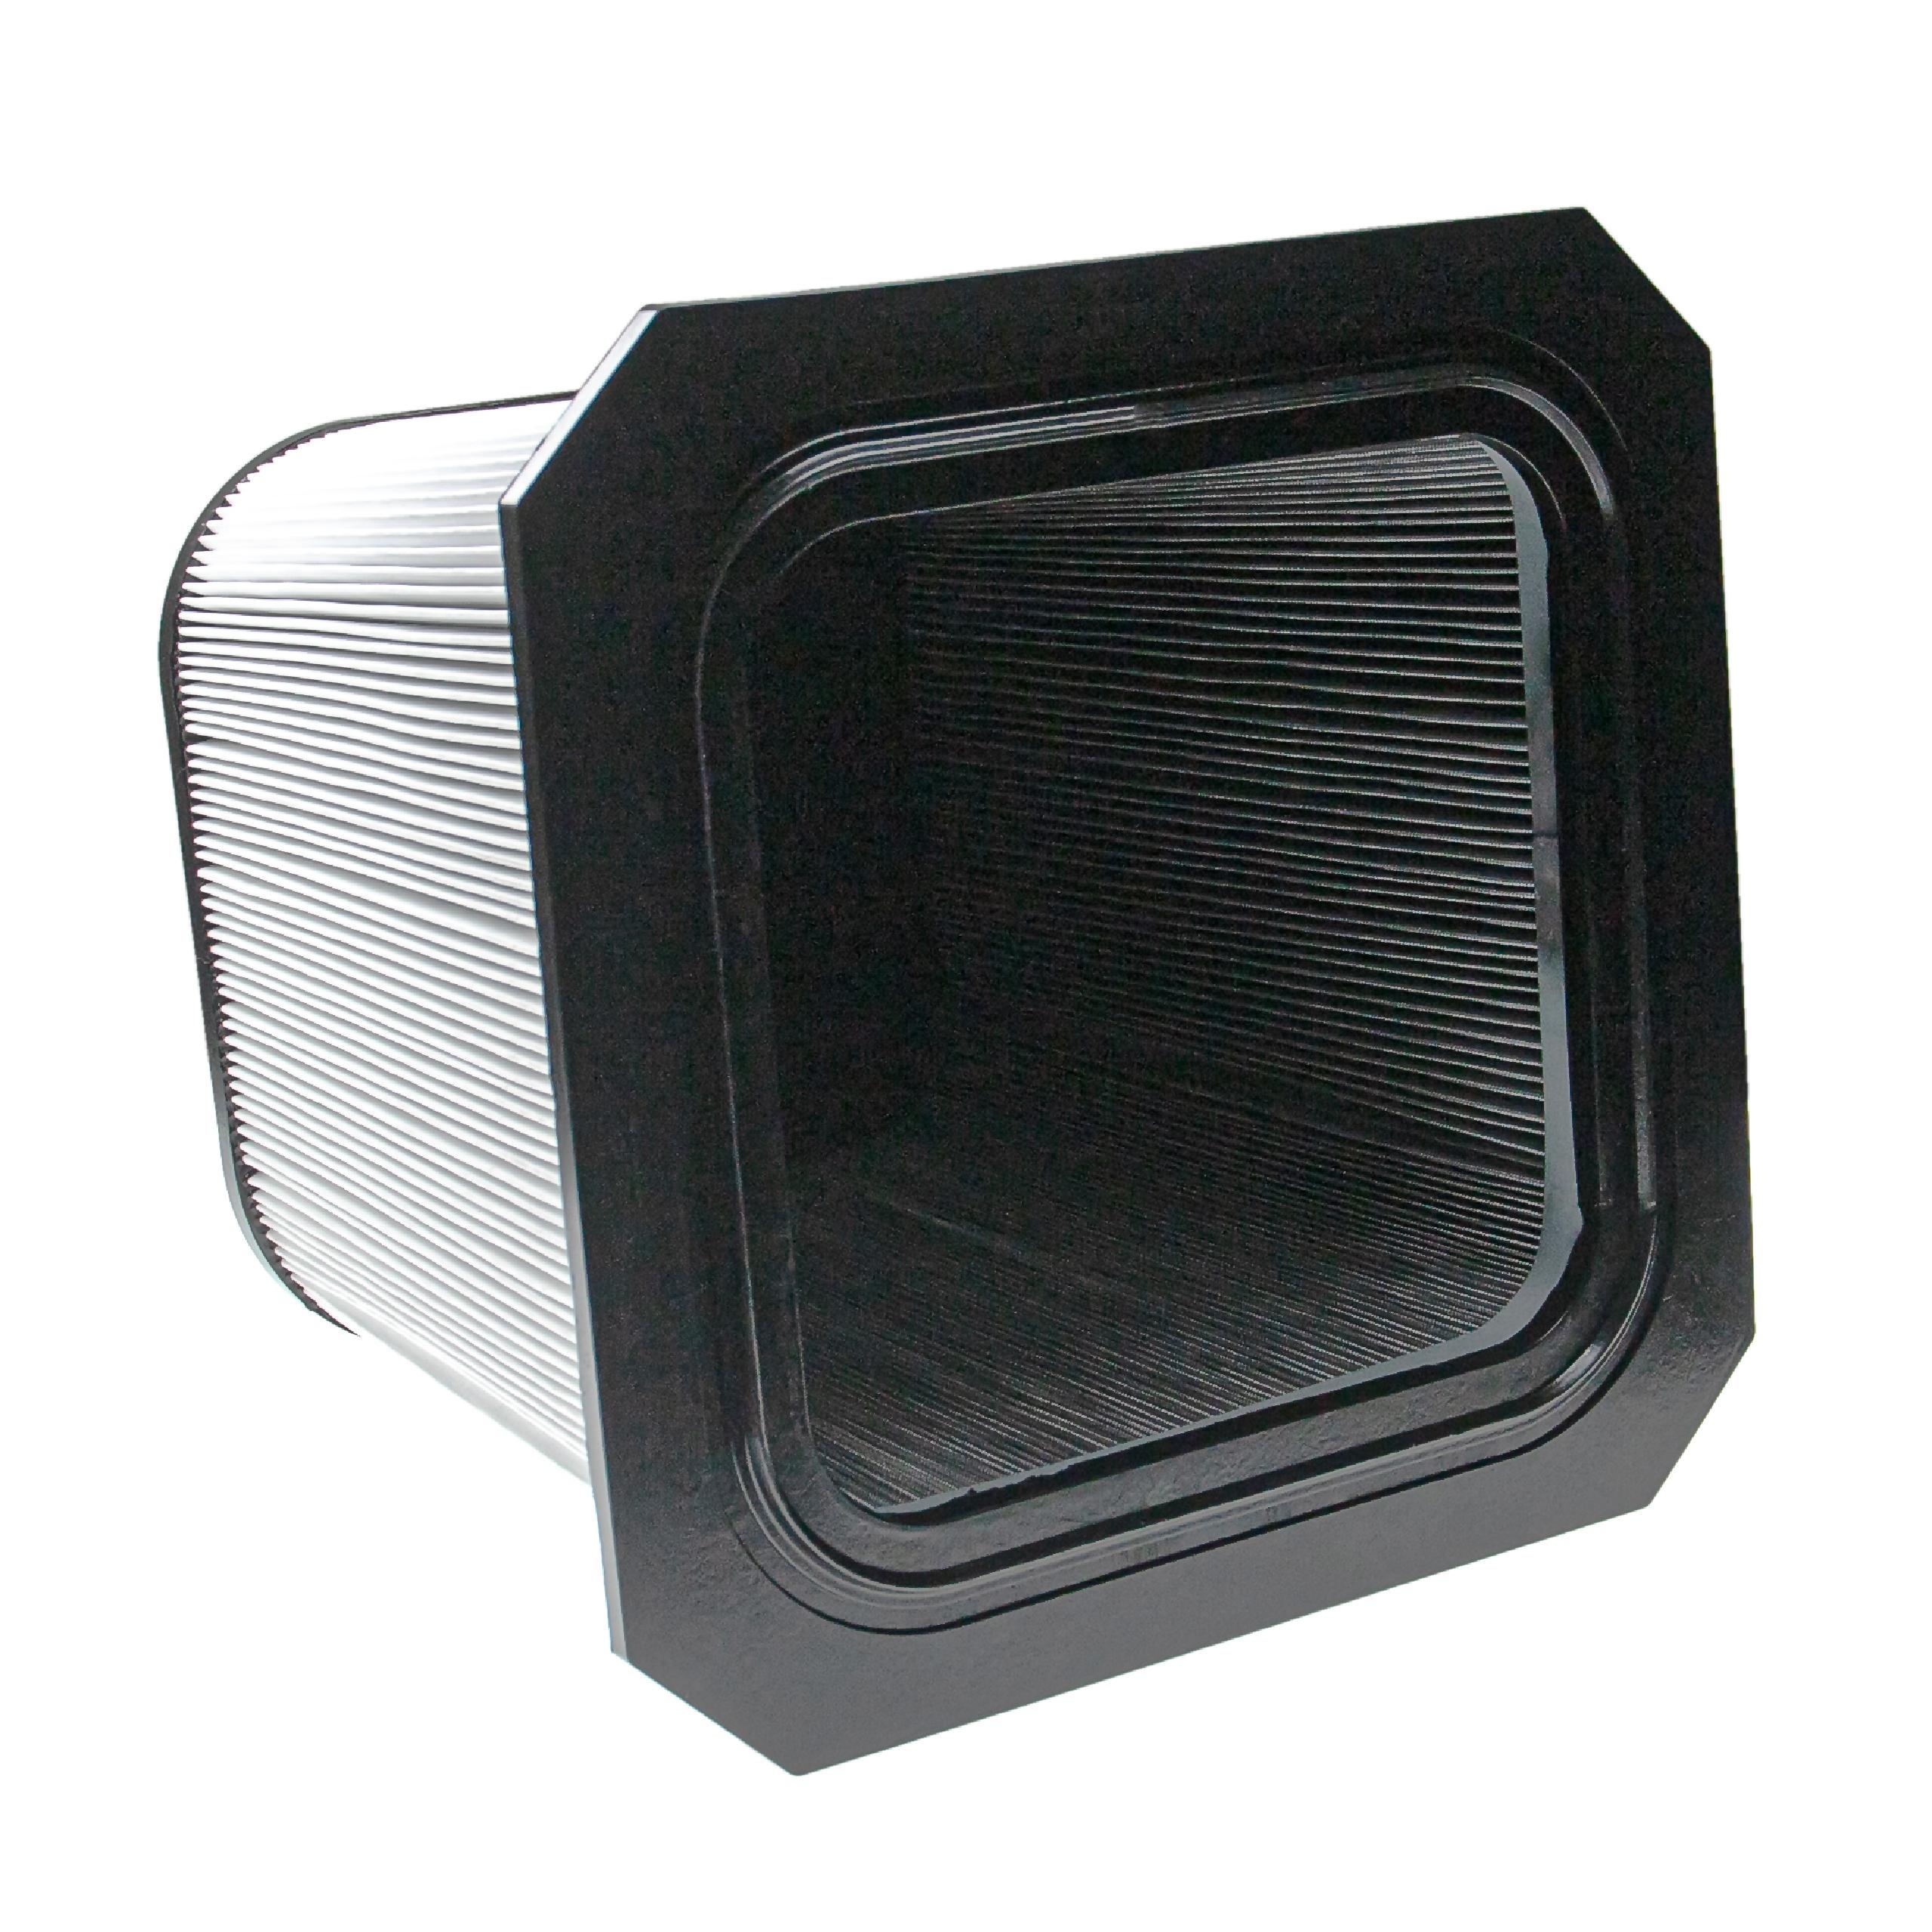 vhbw Micro-Filter Replacement for Dustcontrol 42940 for Air Cleaner - Air Filter Black White